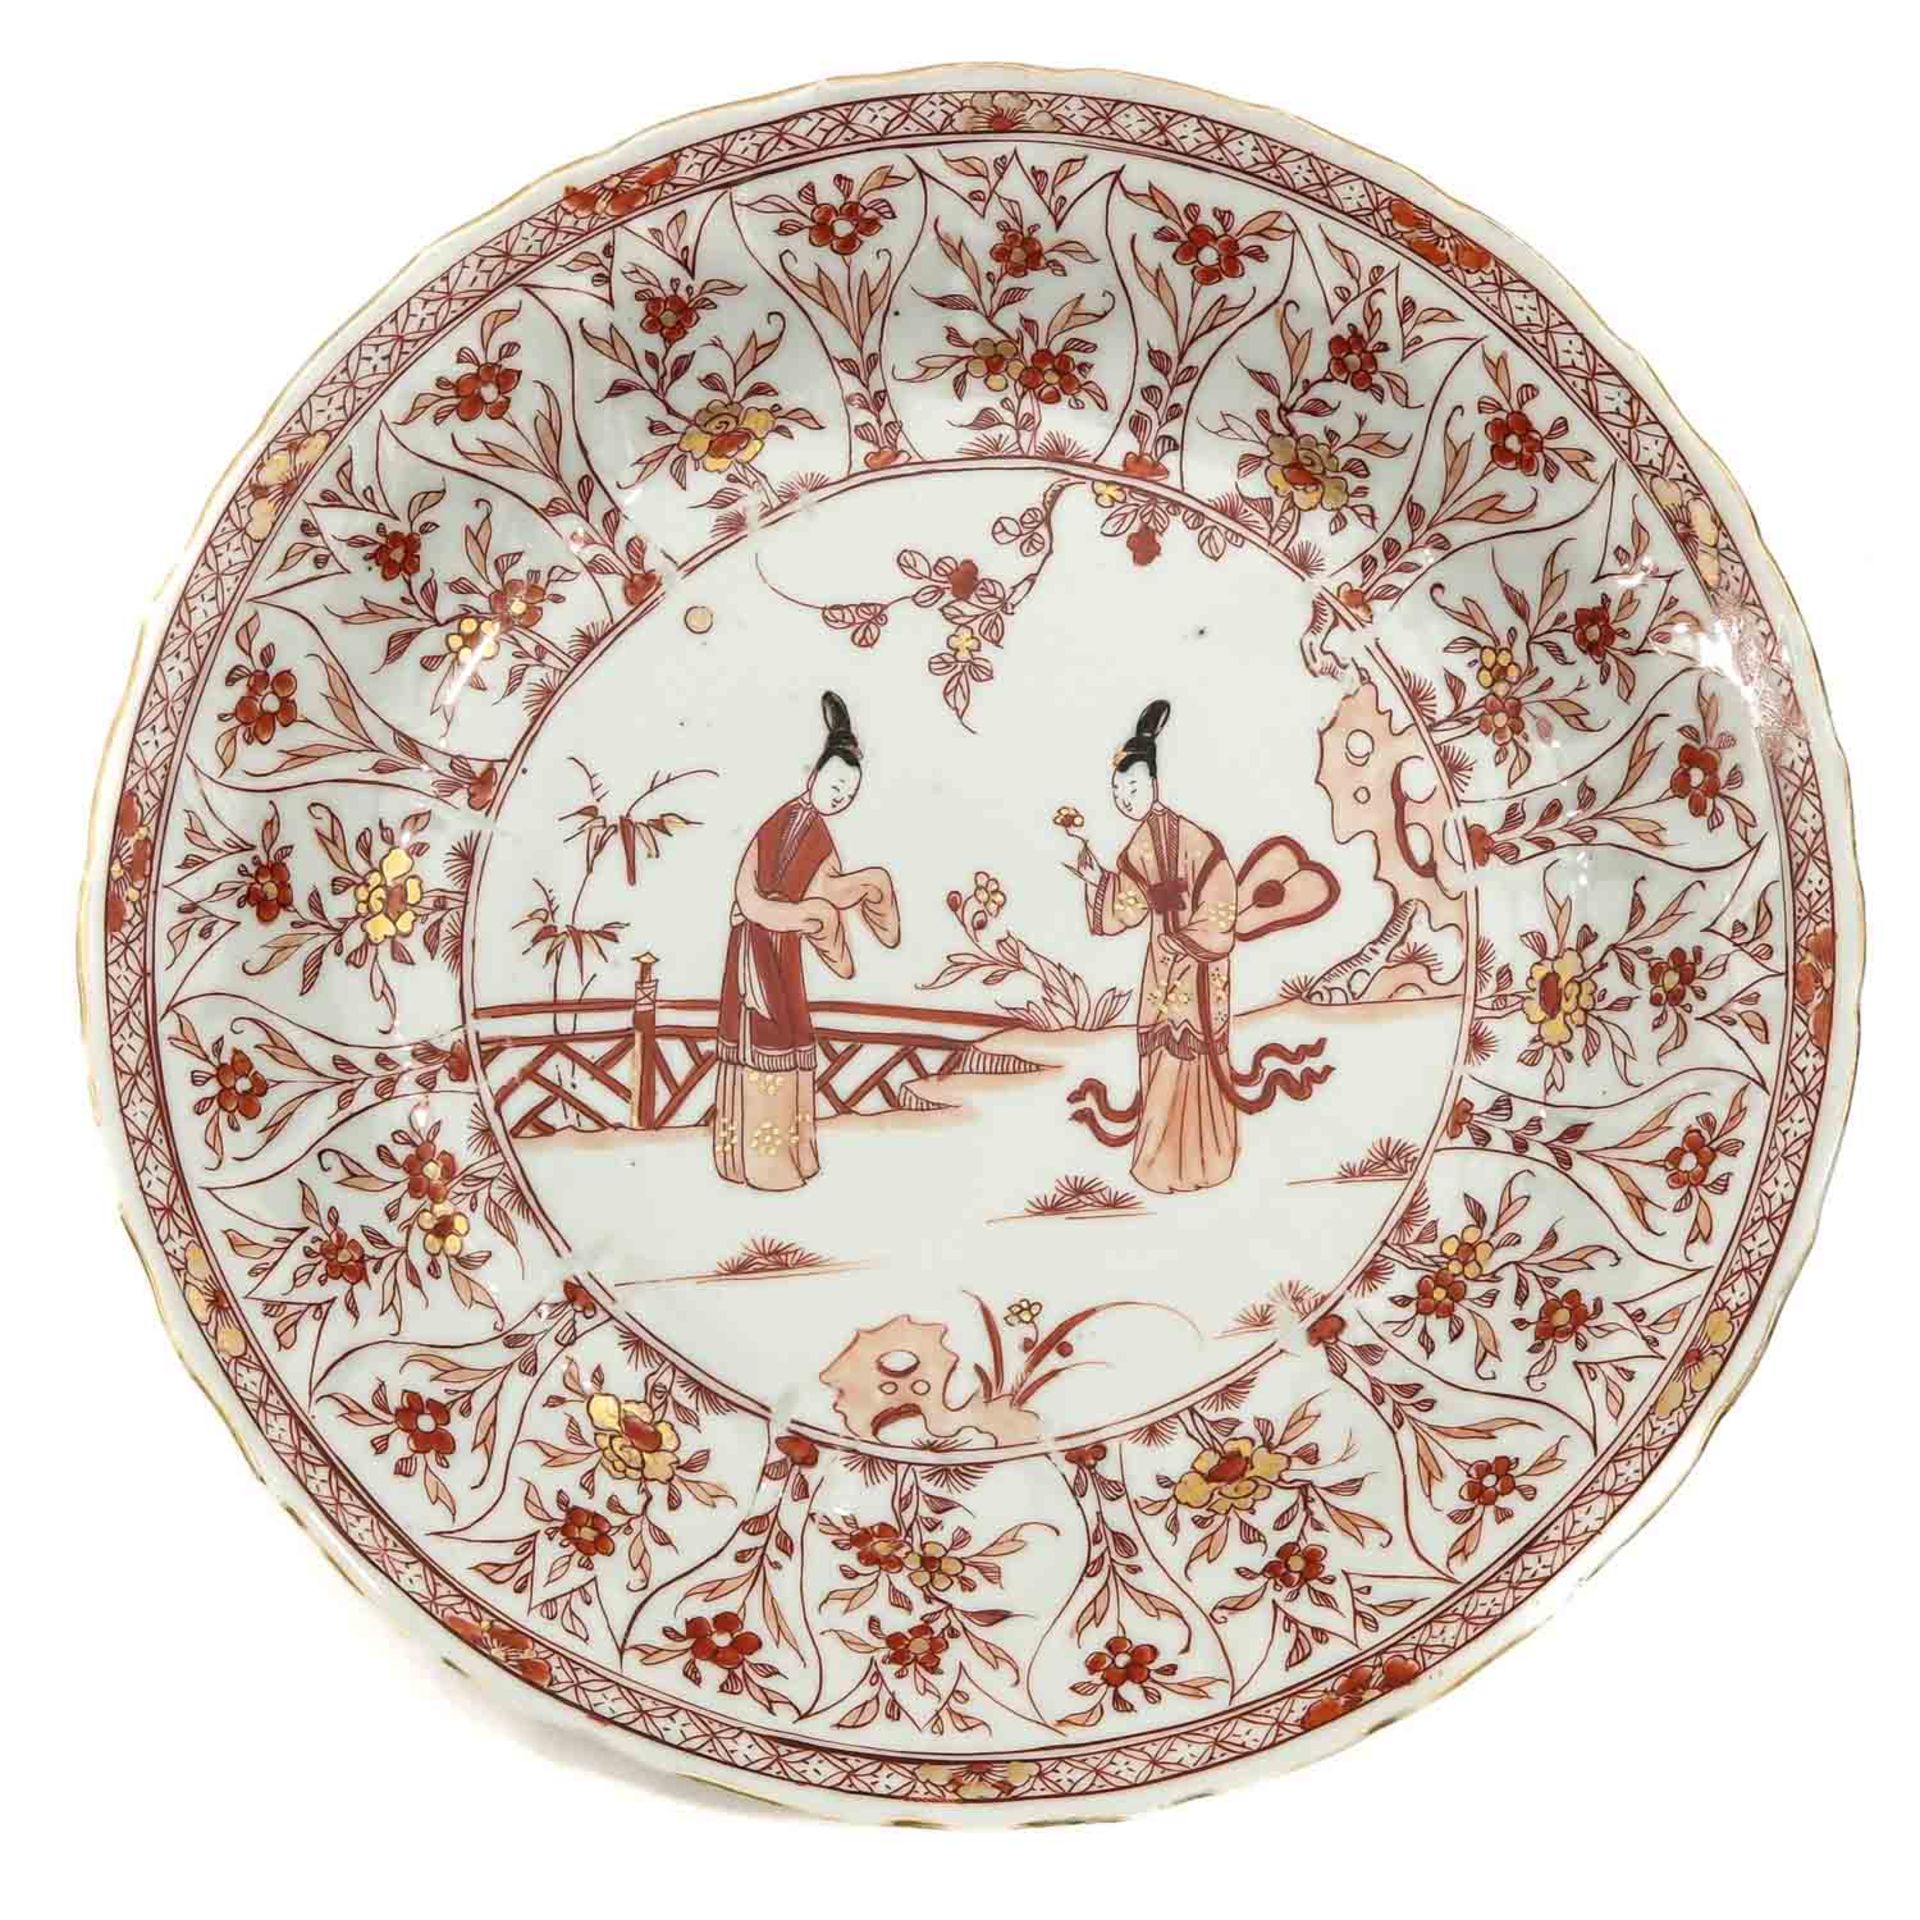 A Series of 3 Iron Red and Gilt Decorates Plates - Image 7 of 10